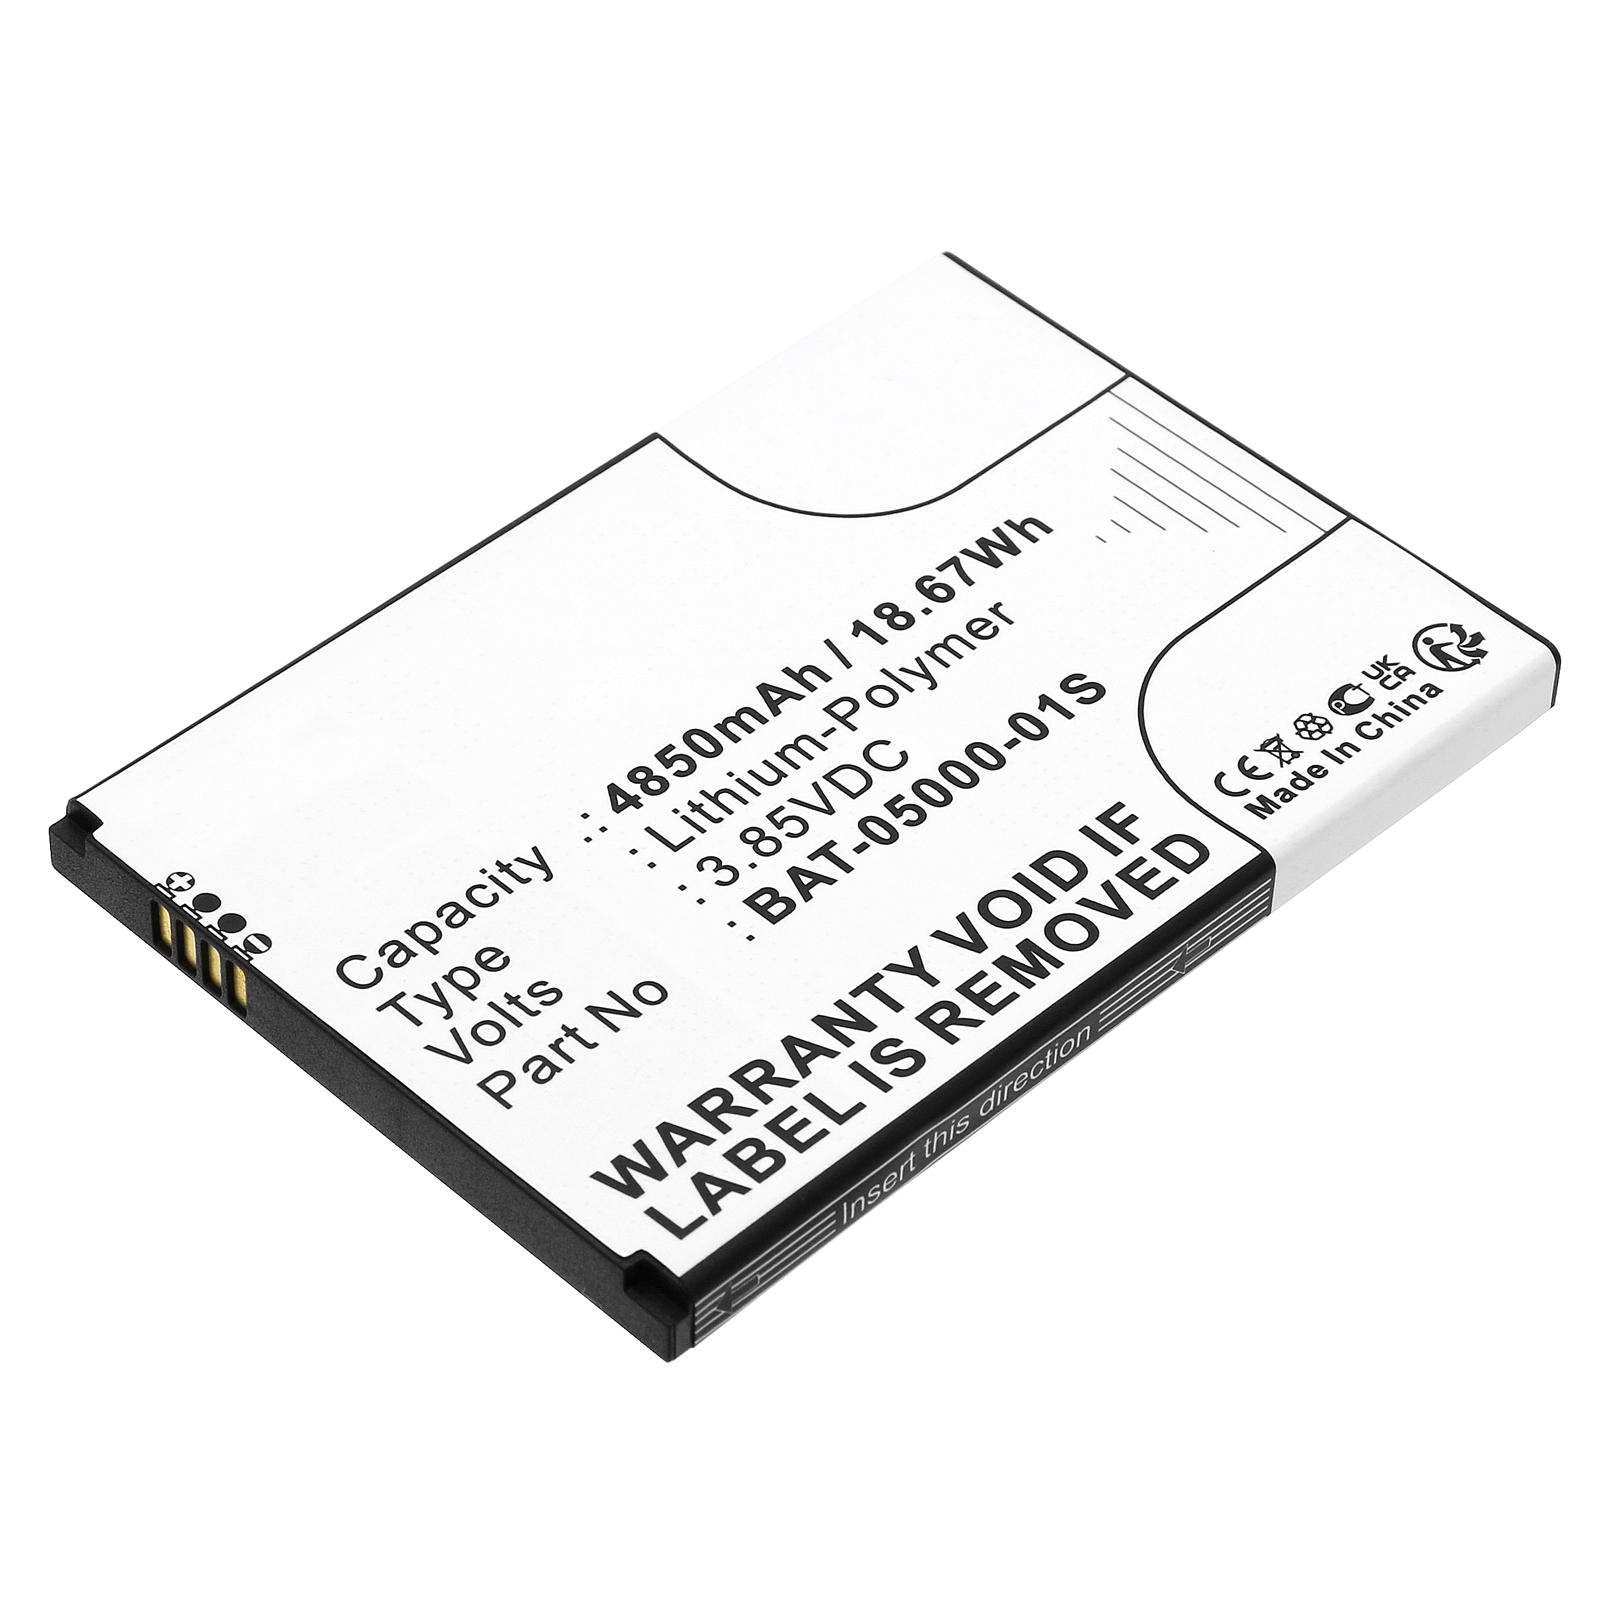 Synergy Digital Cell Phone Battery, Compatible with Sonim BAT-05000-01S Cell Phone Battery (Li-Pol, 3.85V, 4850mAh)